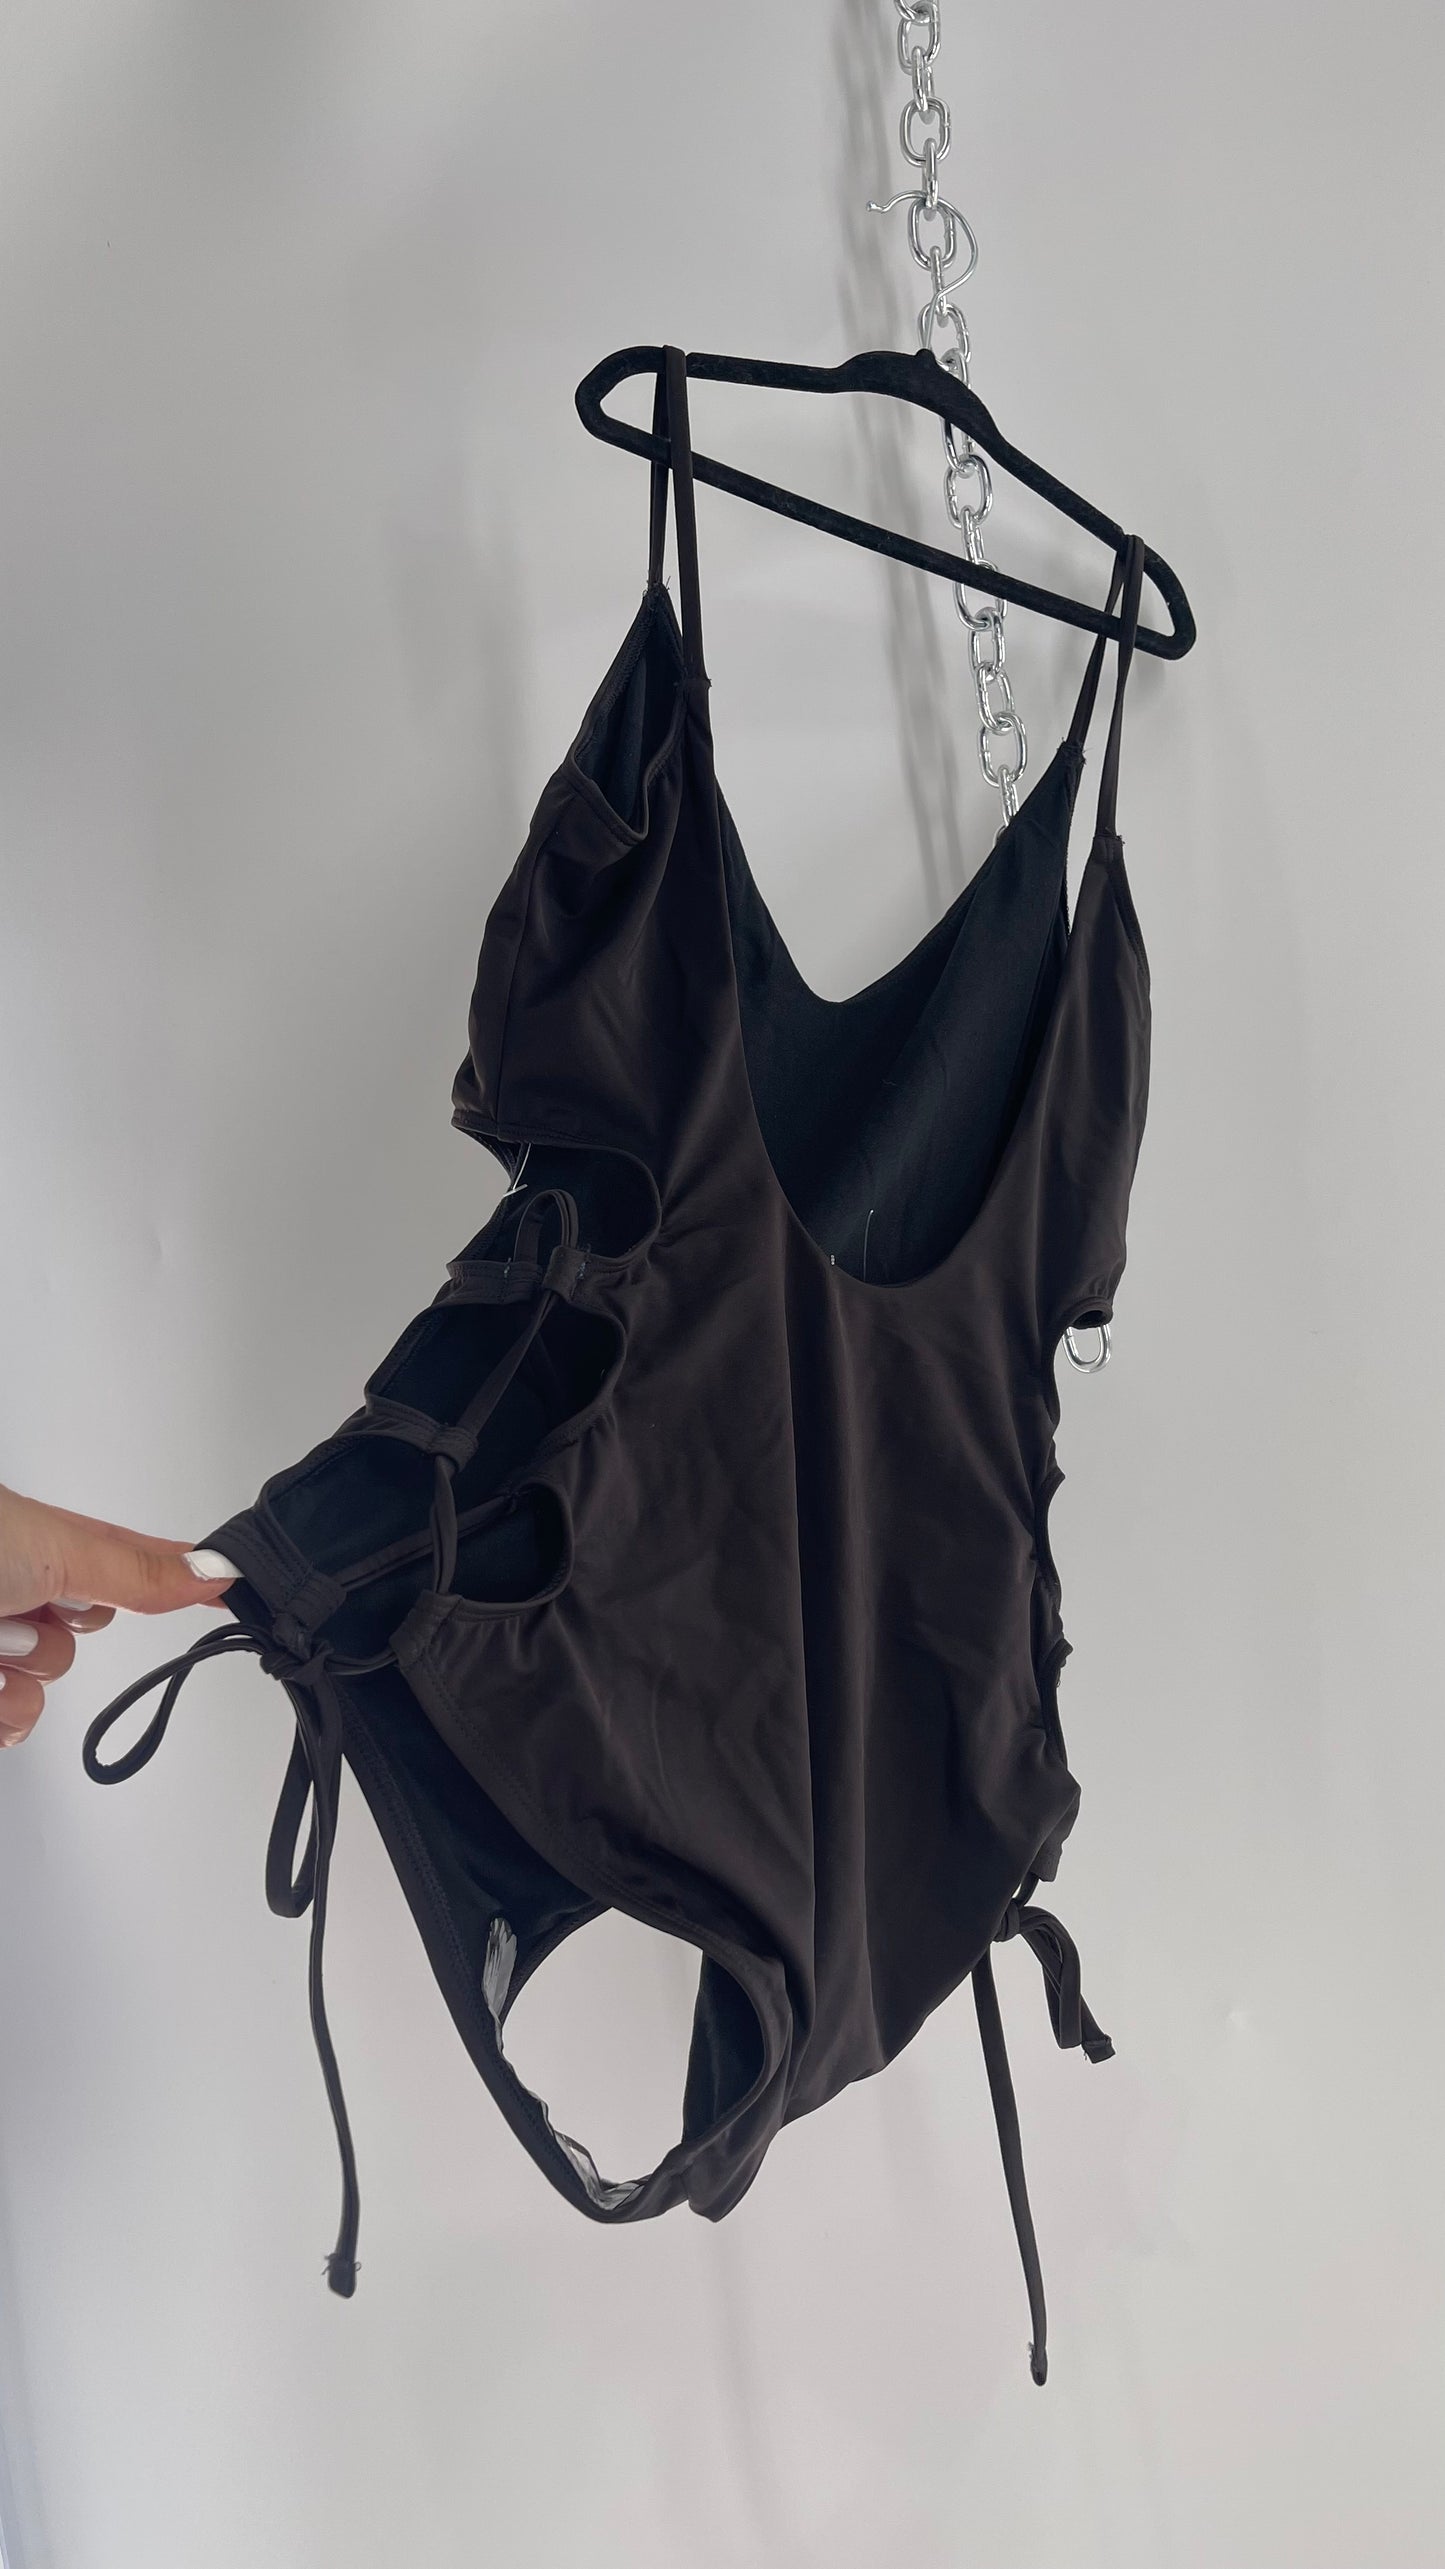 Urban Outfitters Out From Under Black Swimsuit with Lace Up Sides (Large)